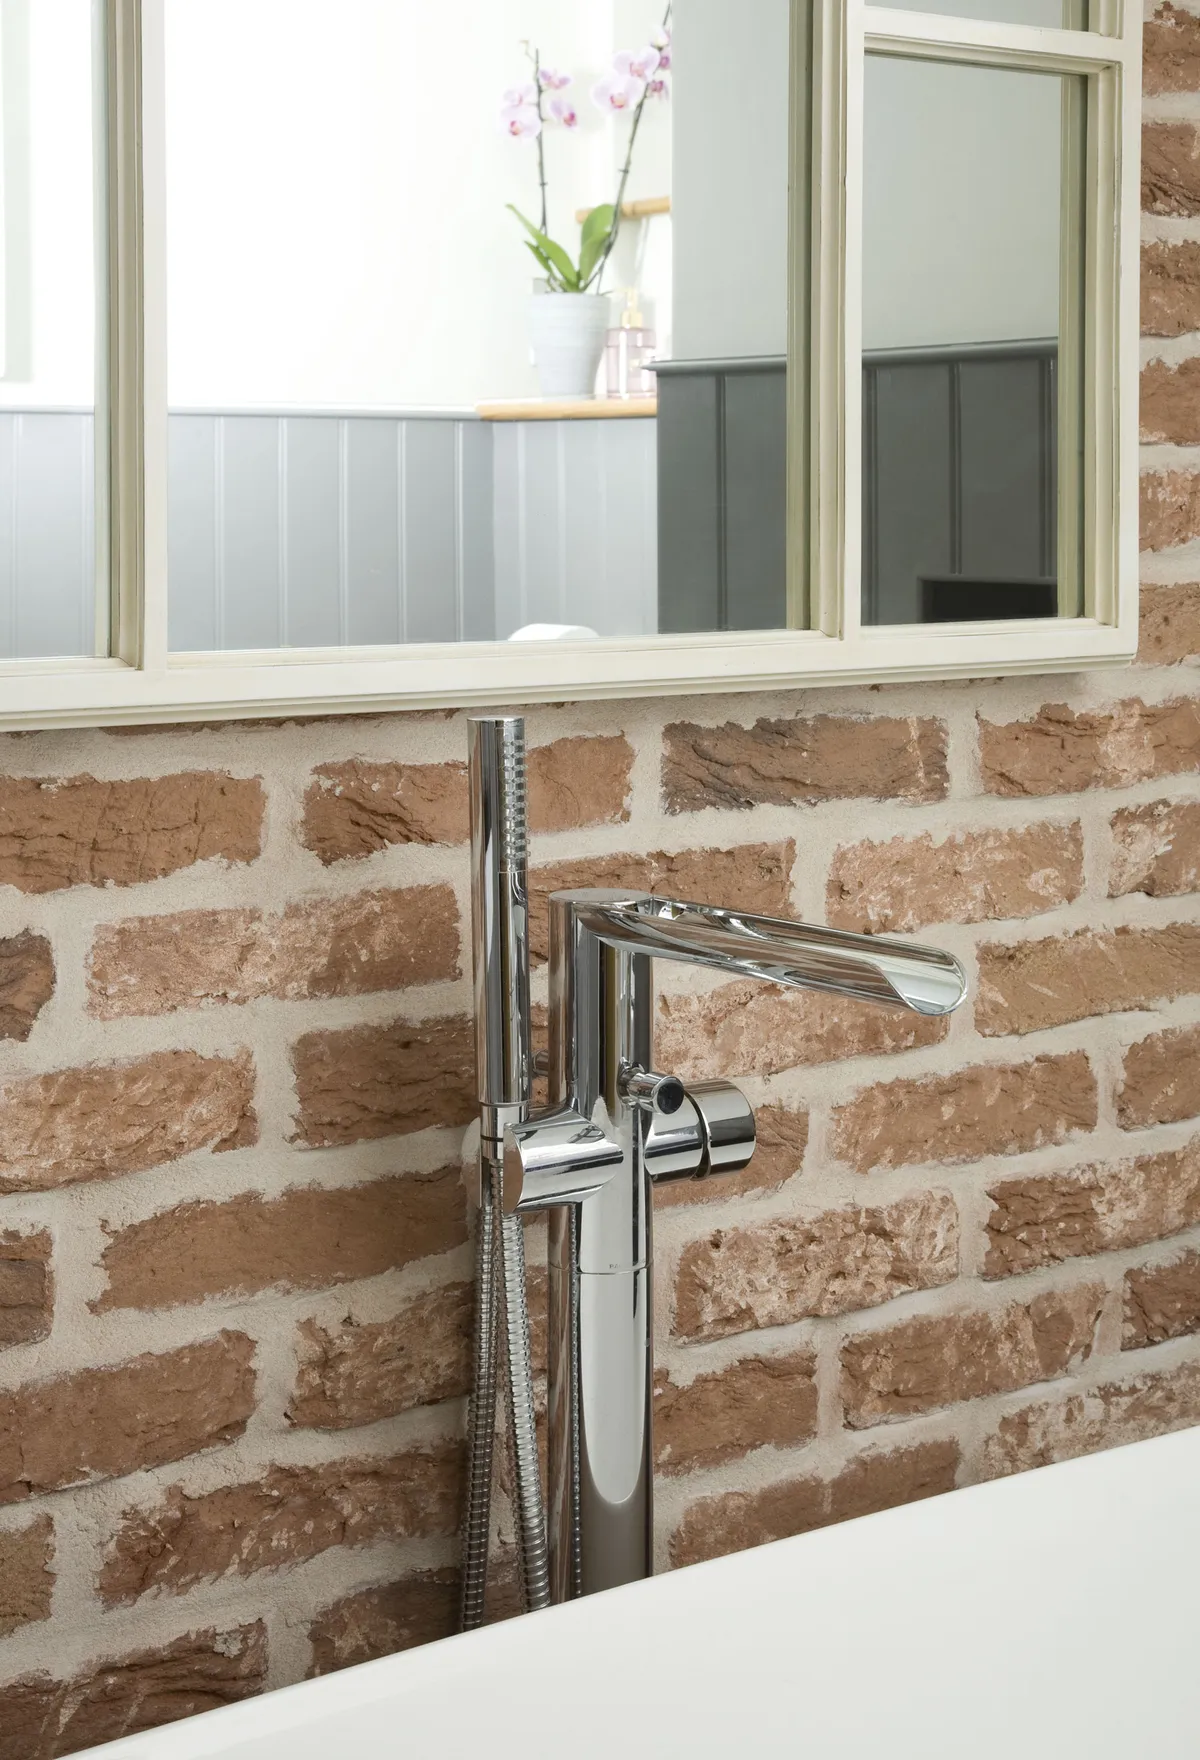 Fashionable taps date quickly, so Lisa stuck to a simple, stainless-steel design for her floor-standing bath filler, which contrasts beautifully with the brick-slip tiled wall